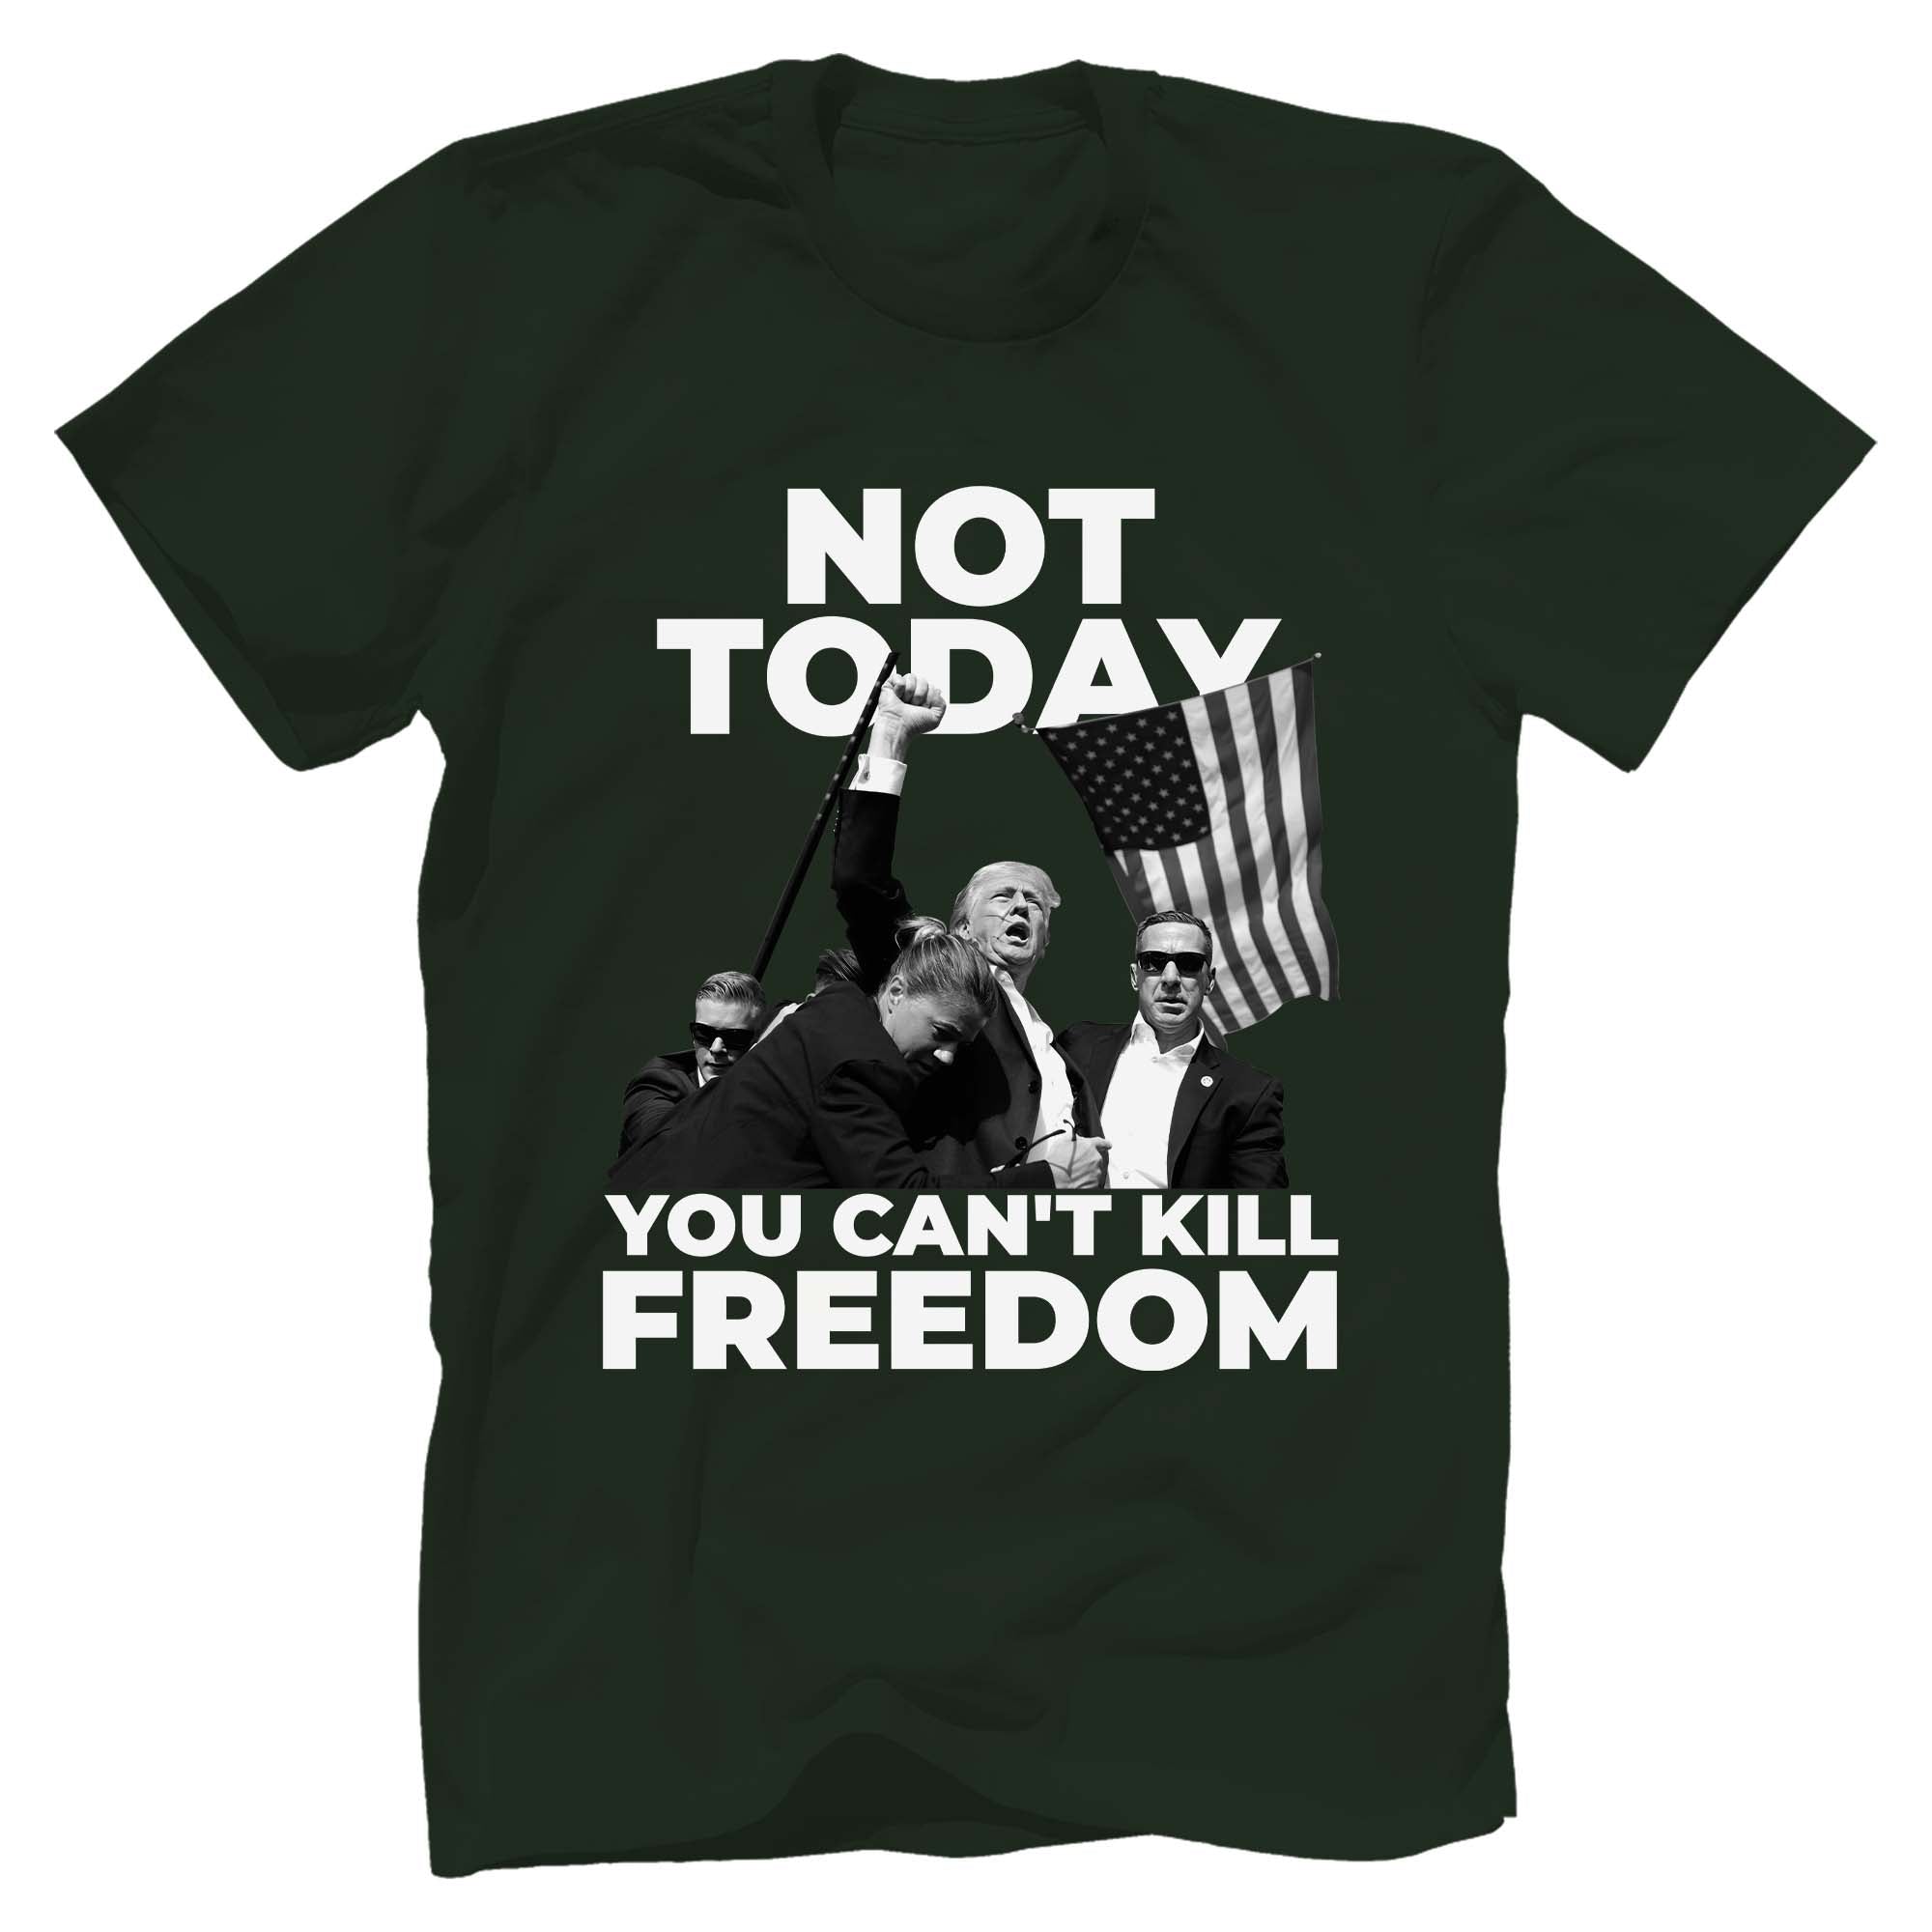 Not Today, Trump Fight, US Election T-Shirt - GB98